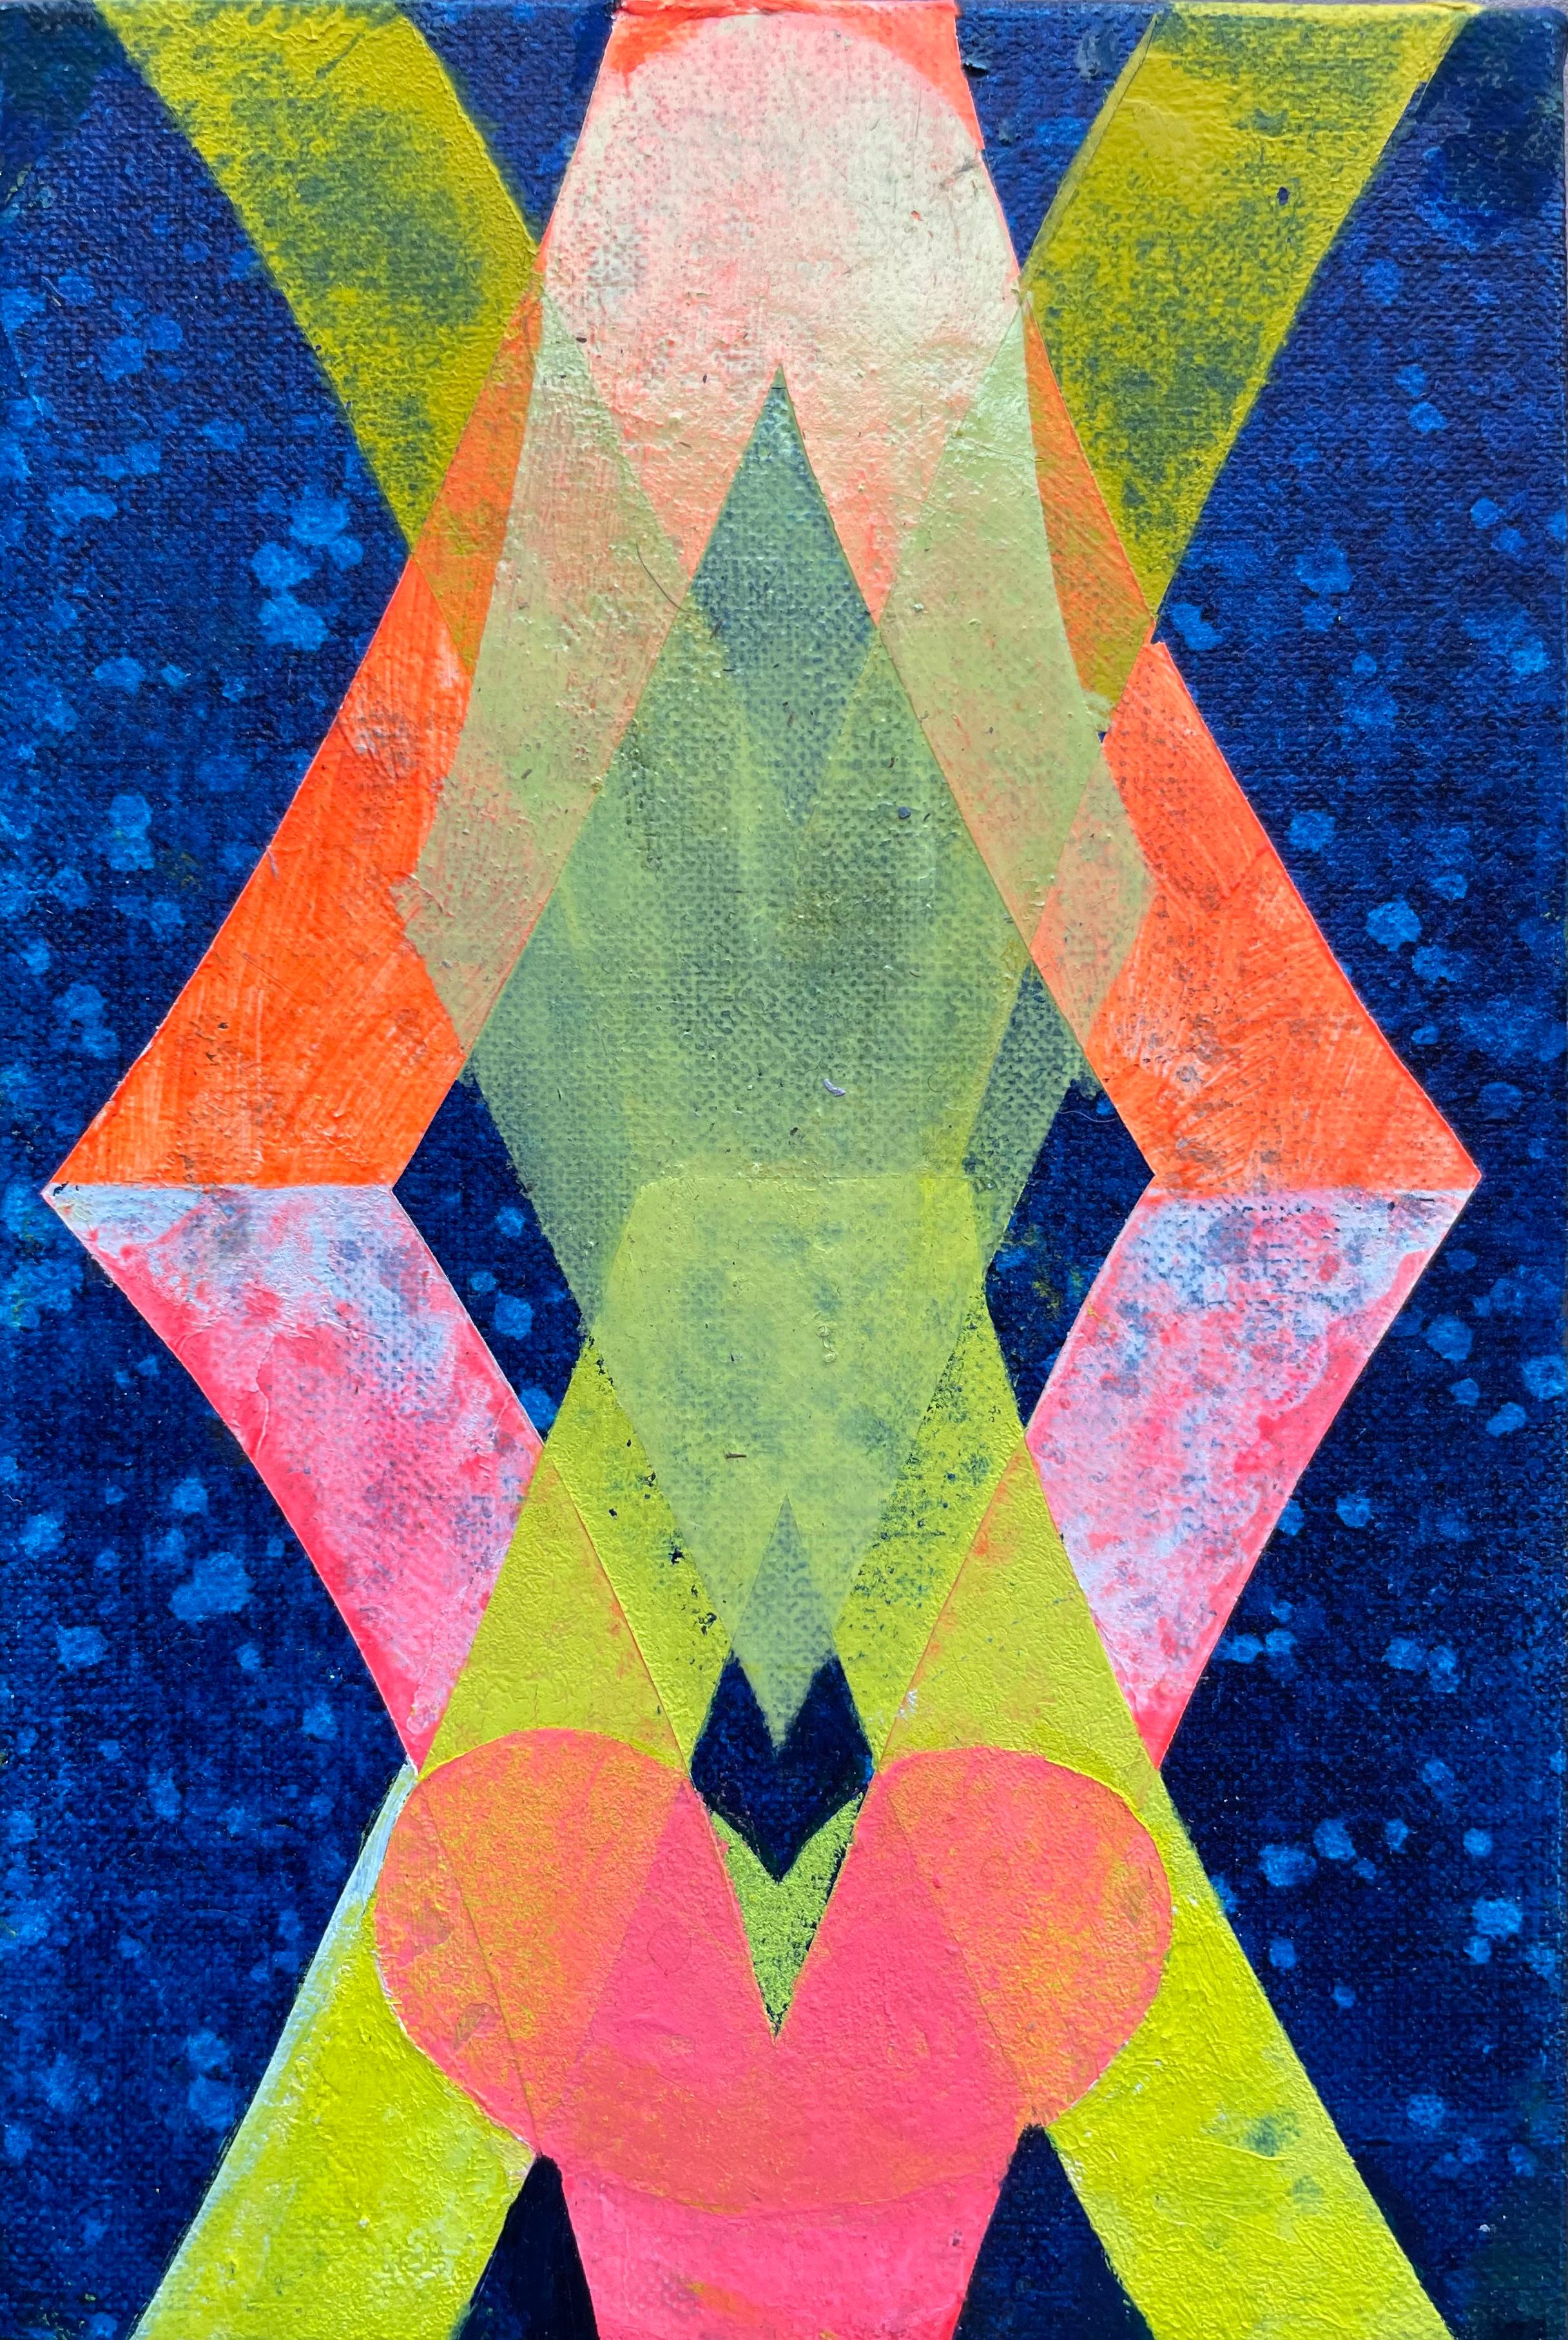 In this oil painting on linen, the neon yellow shape in the center is vibrant and bright, offsetting layered, eye-catching geometric forms in orange and fuchsia pink against a mottled brilliant blue background. Signed, dated and titled on verso.